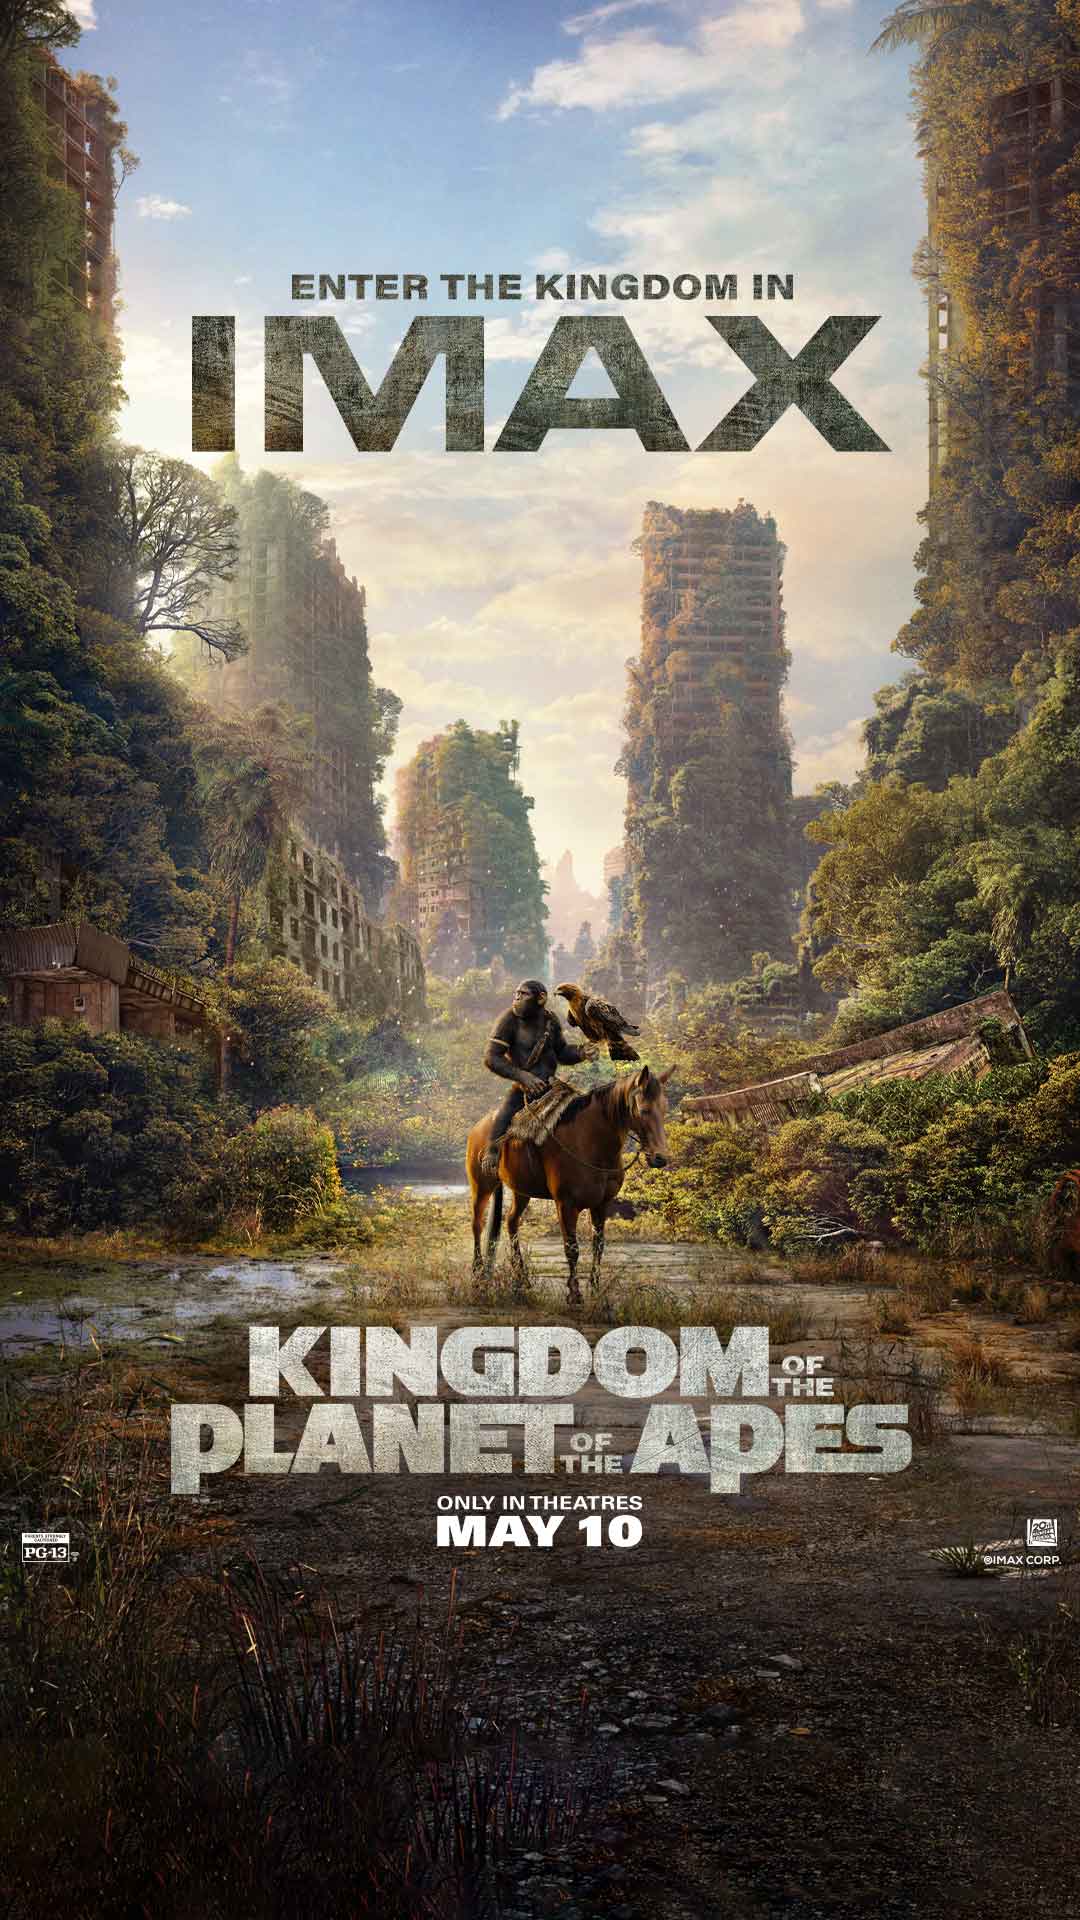 Kingdom of the Planet of the Apes movie poster with an ape on a horse